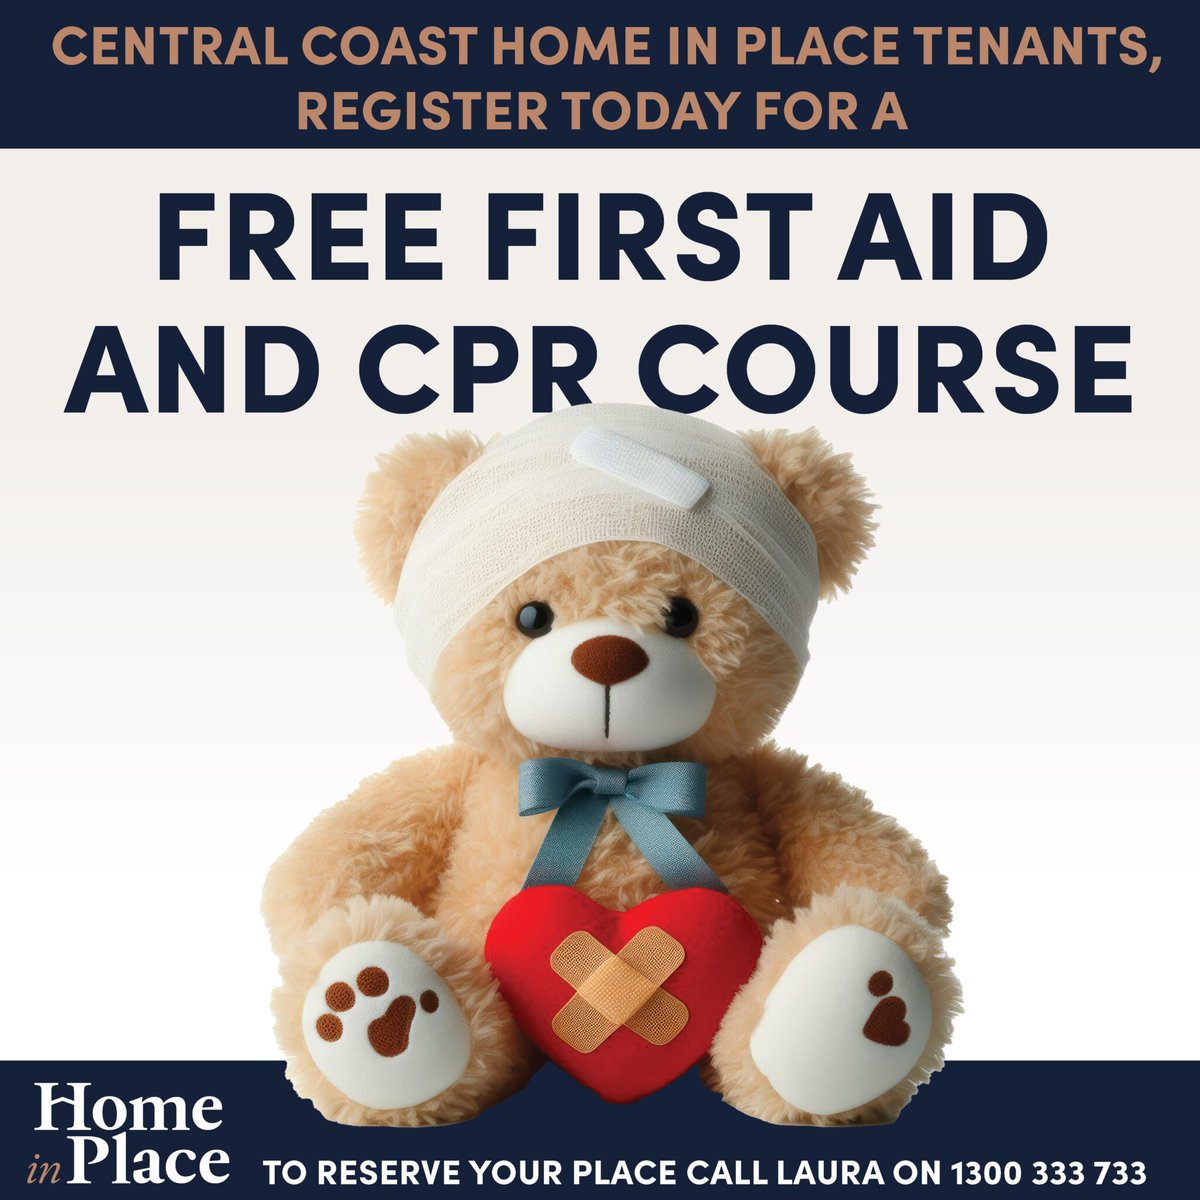 Central Coast Home in Place tenants 🏠 Register today for a FREE First Aid course, presented at The Meeting Place 😀 RSVP to Laura 1300333733 or centralcoast@homeinplace.org